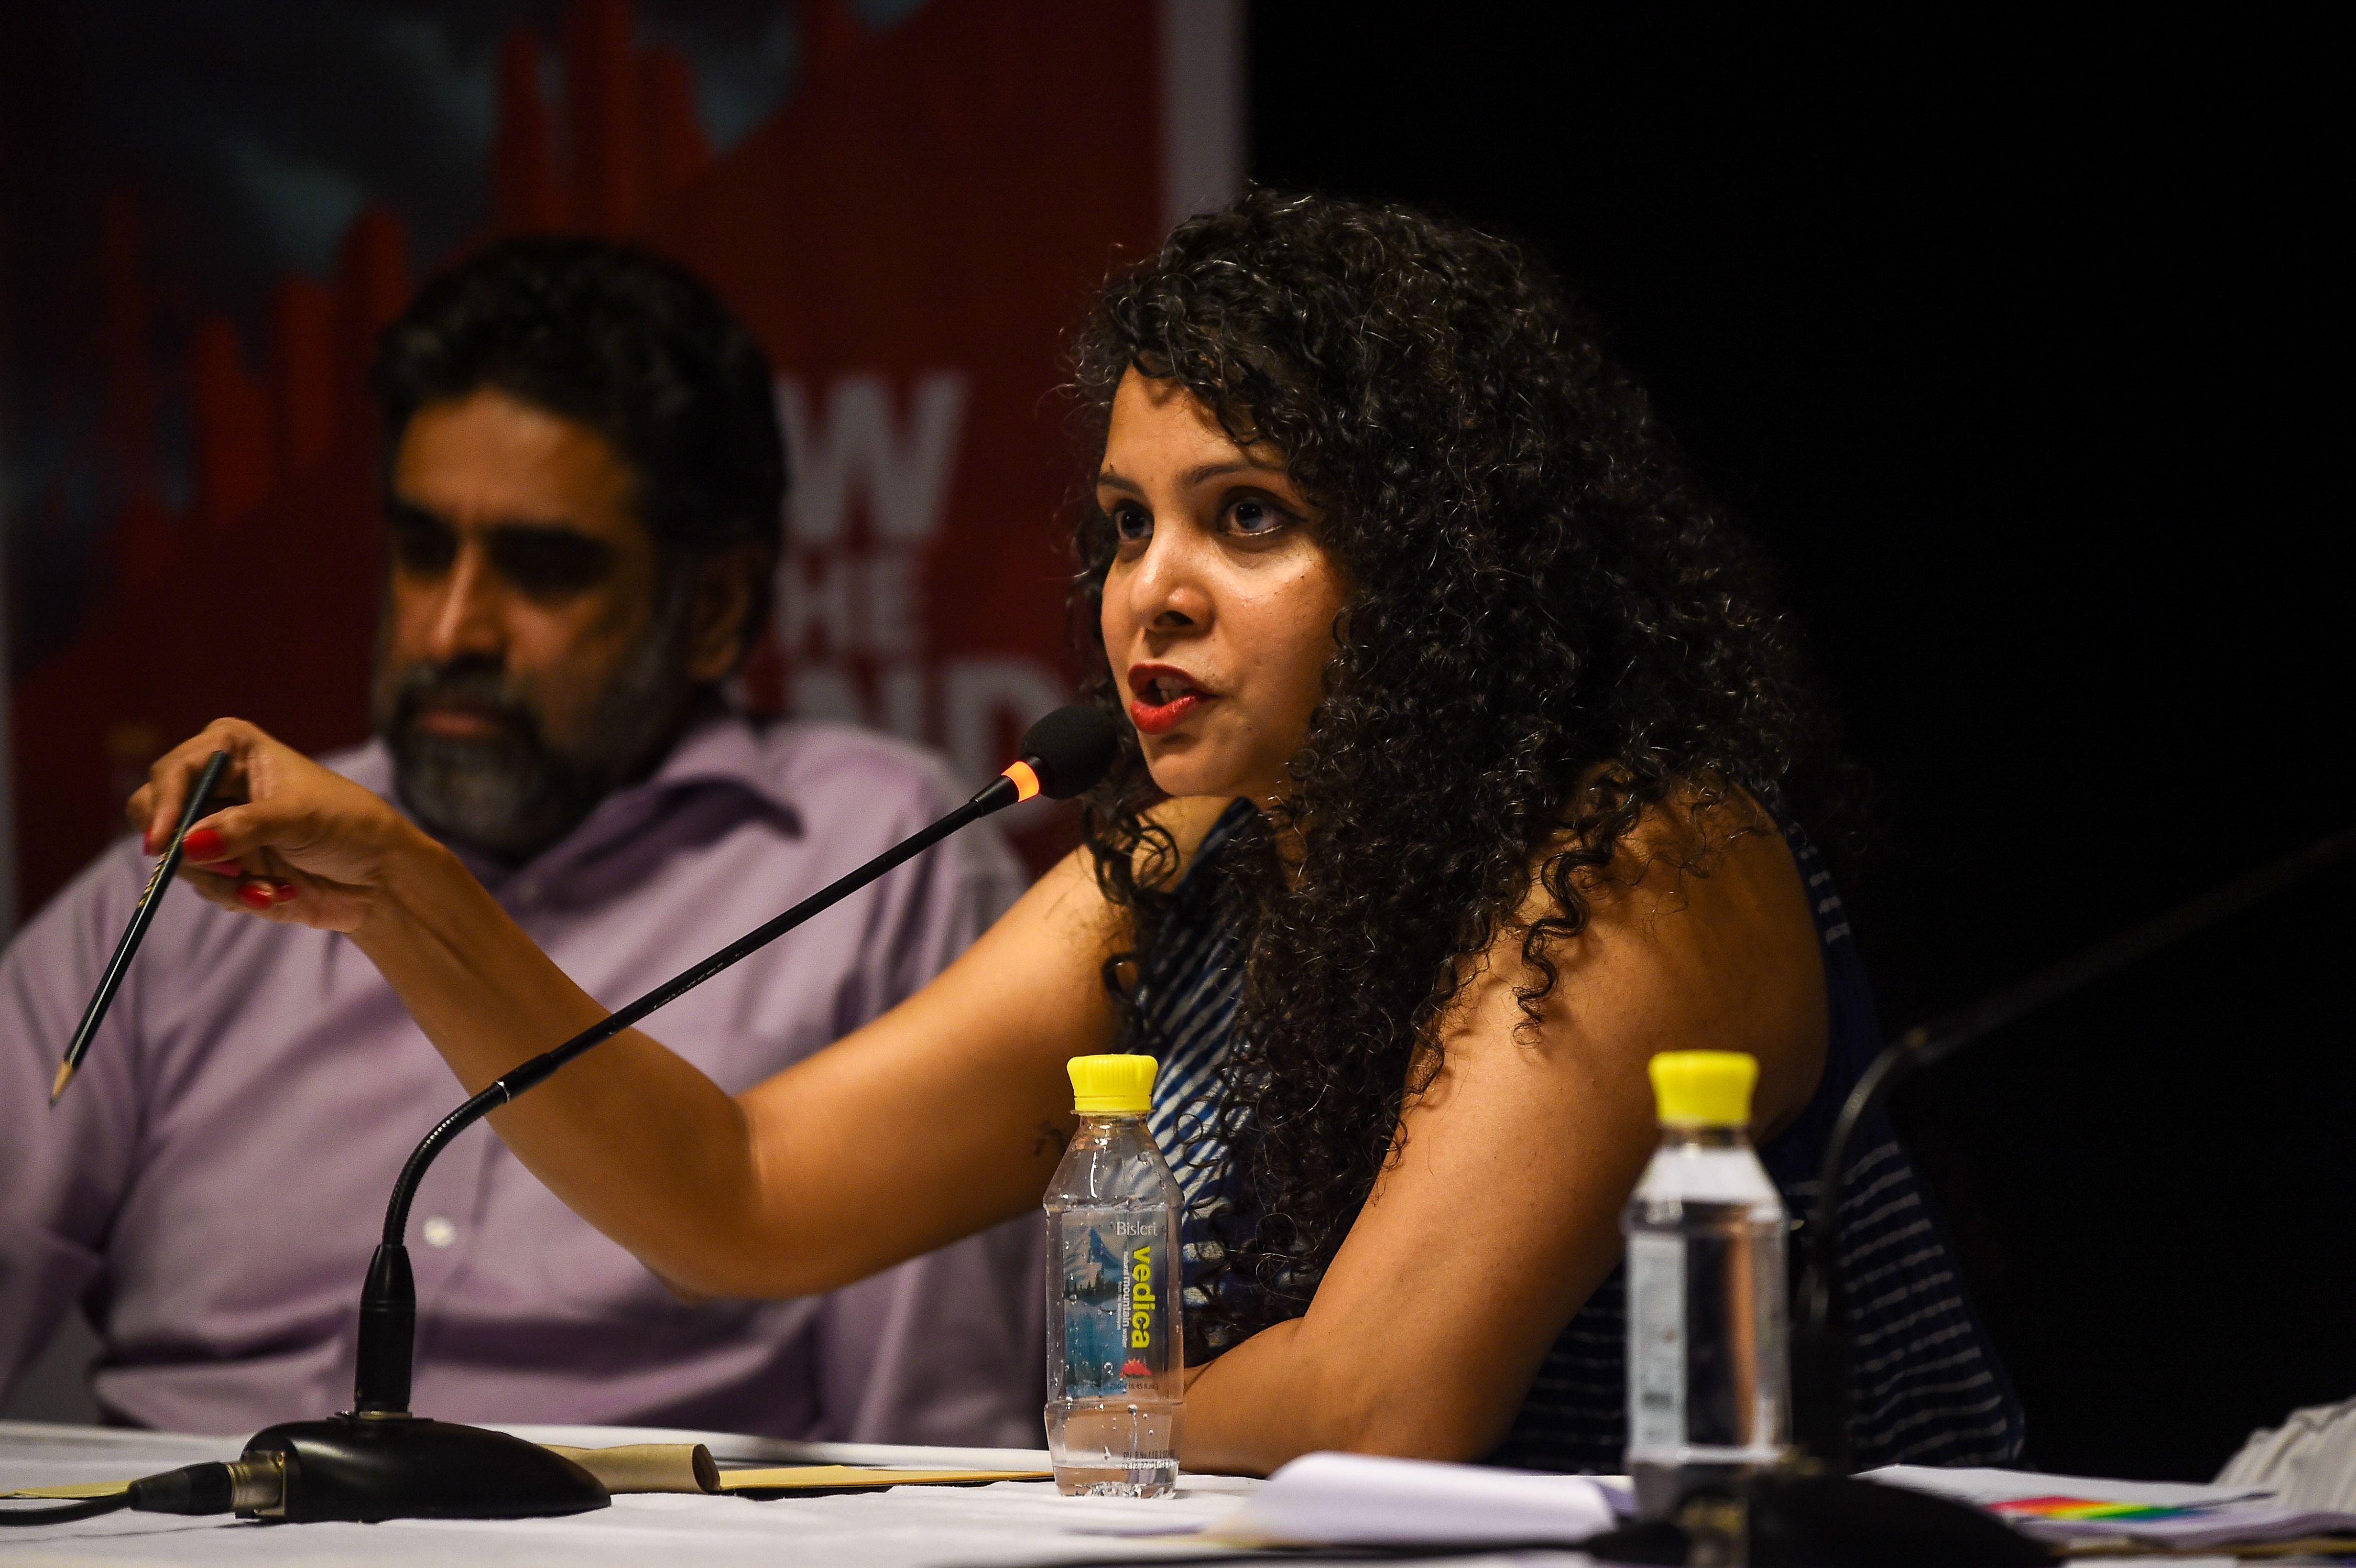 In this photograph taken on May 27, 2016, Indian journalist and author, Rana Ayyub speaks during the launch of her self published book 'Gujarat Files' in New Delhi, CHANDAN KHANNA/AFP/Getty Images